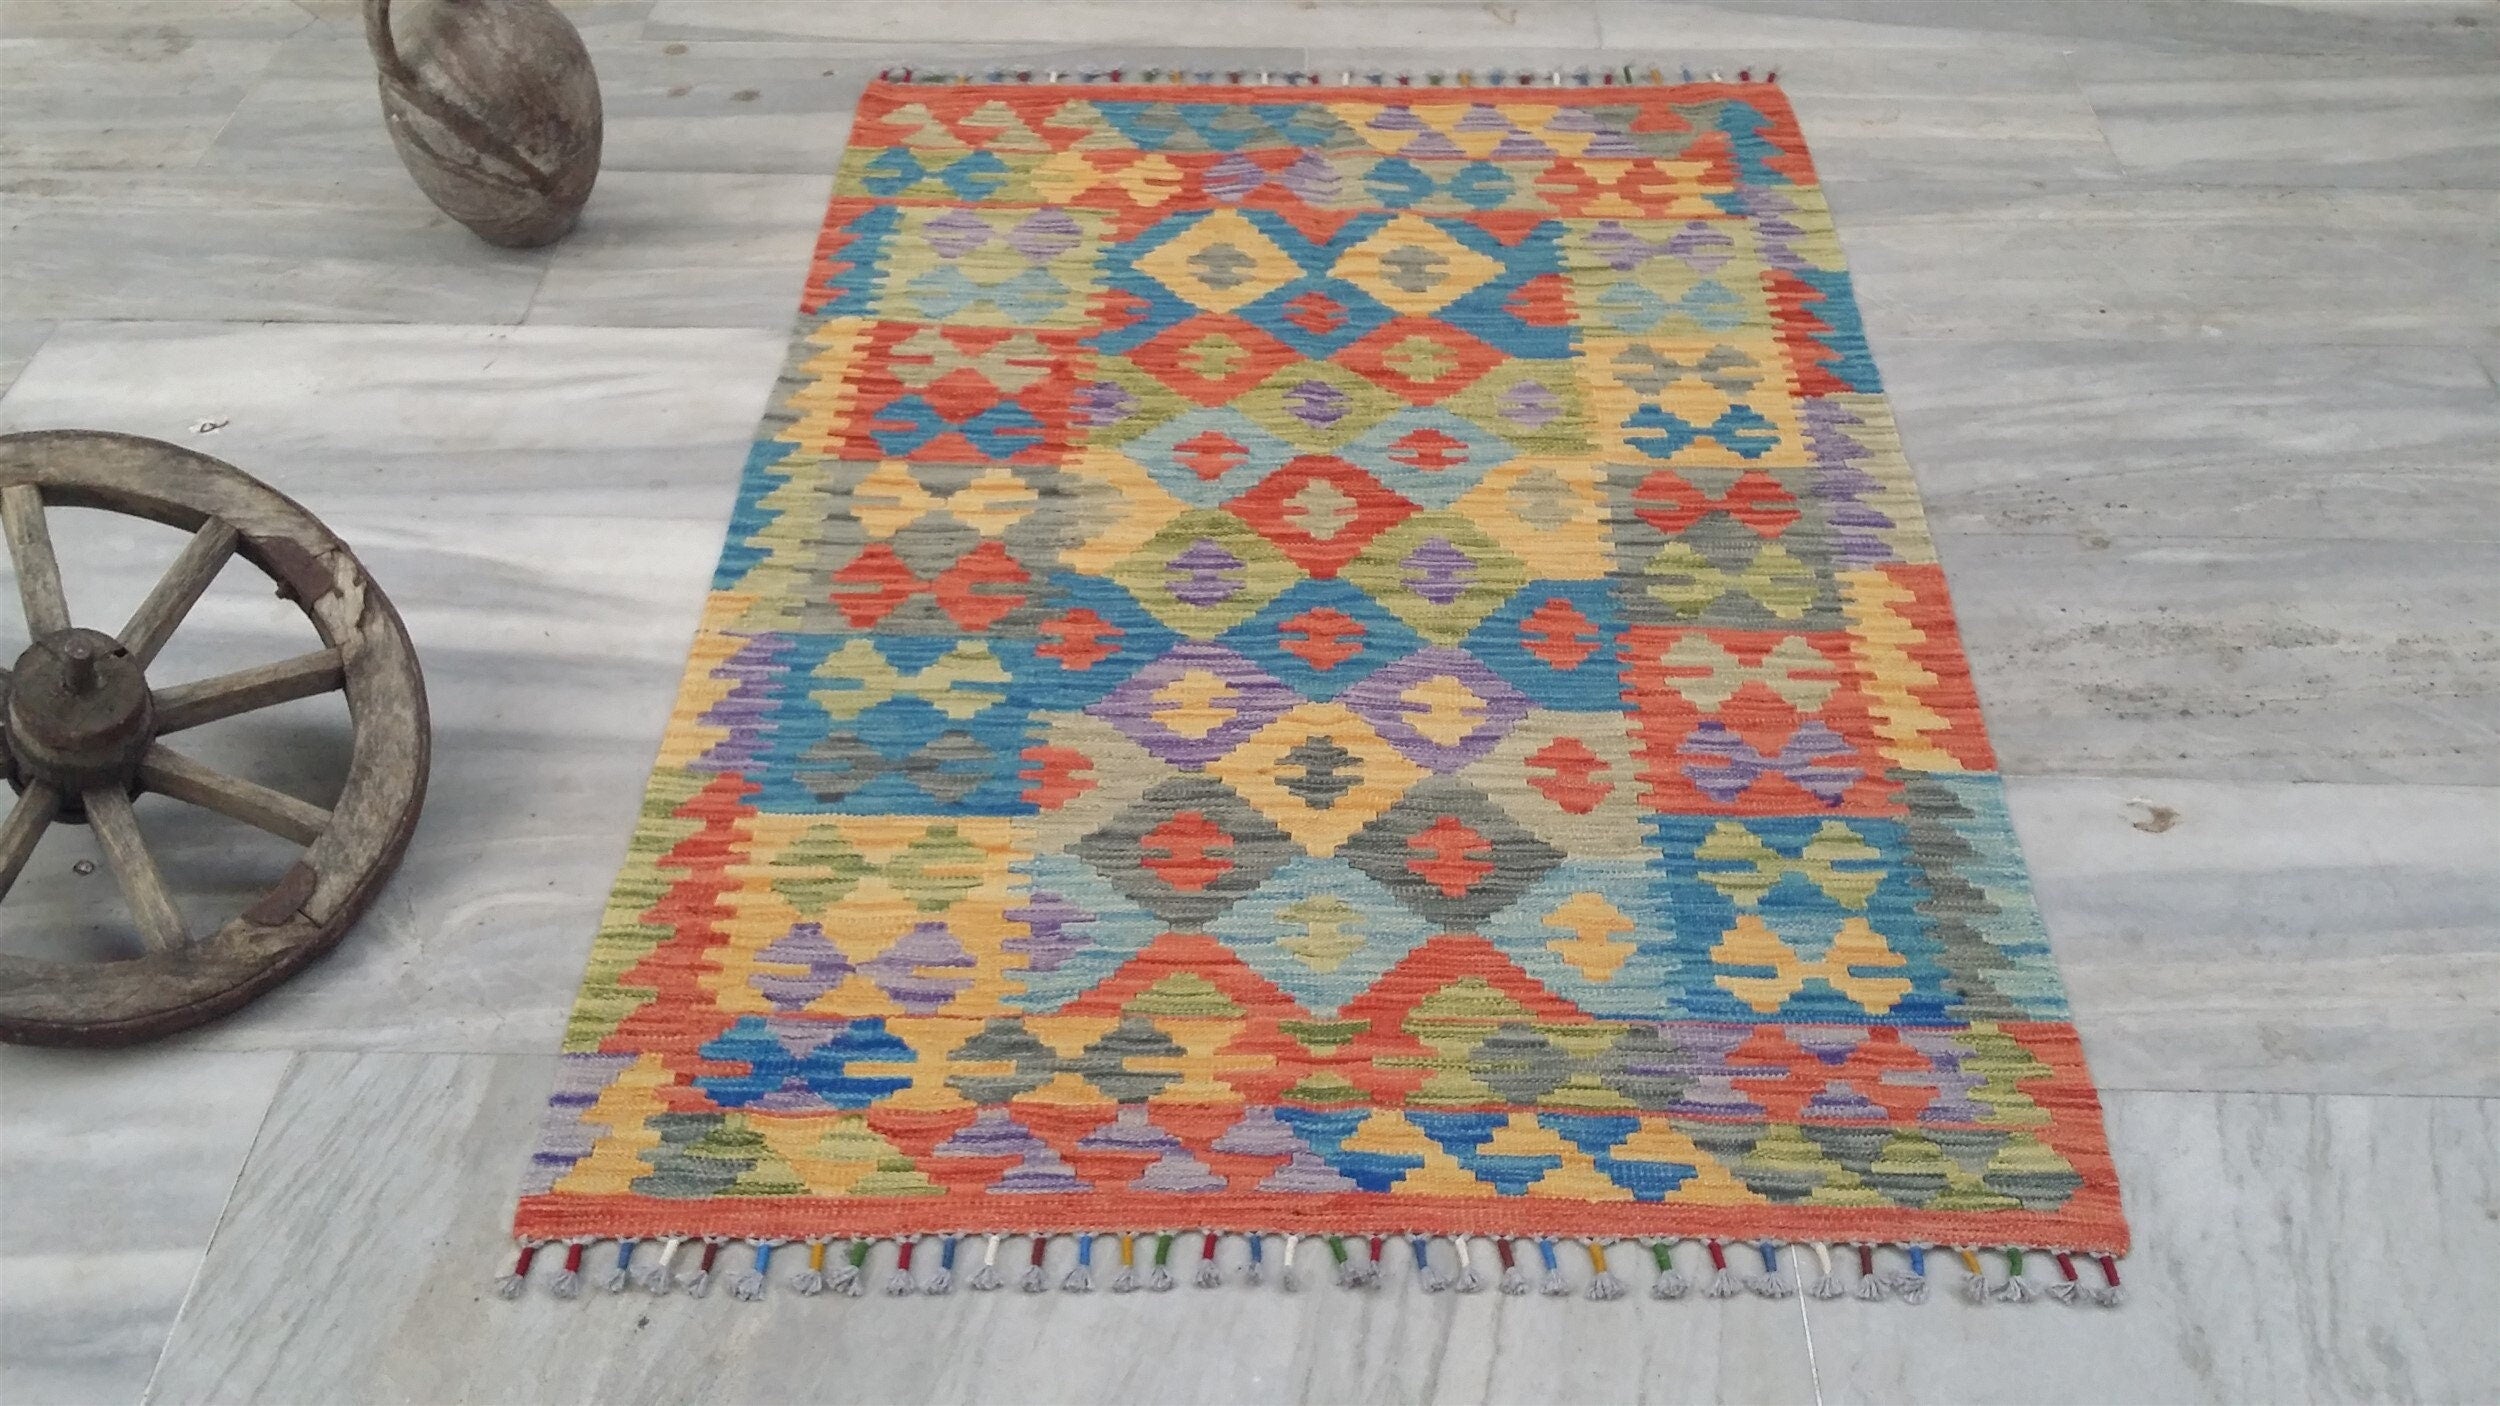 Turkish Kilim Rug,4 ft 9 in x 3 ft 3 in, Contemporary Flatweave Rug